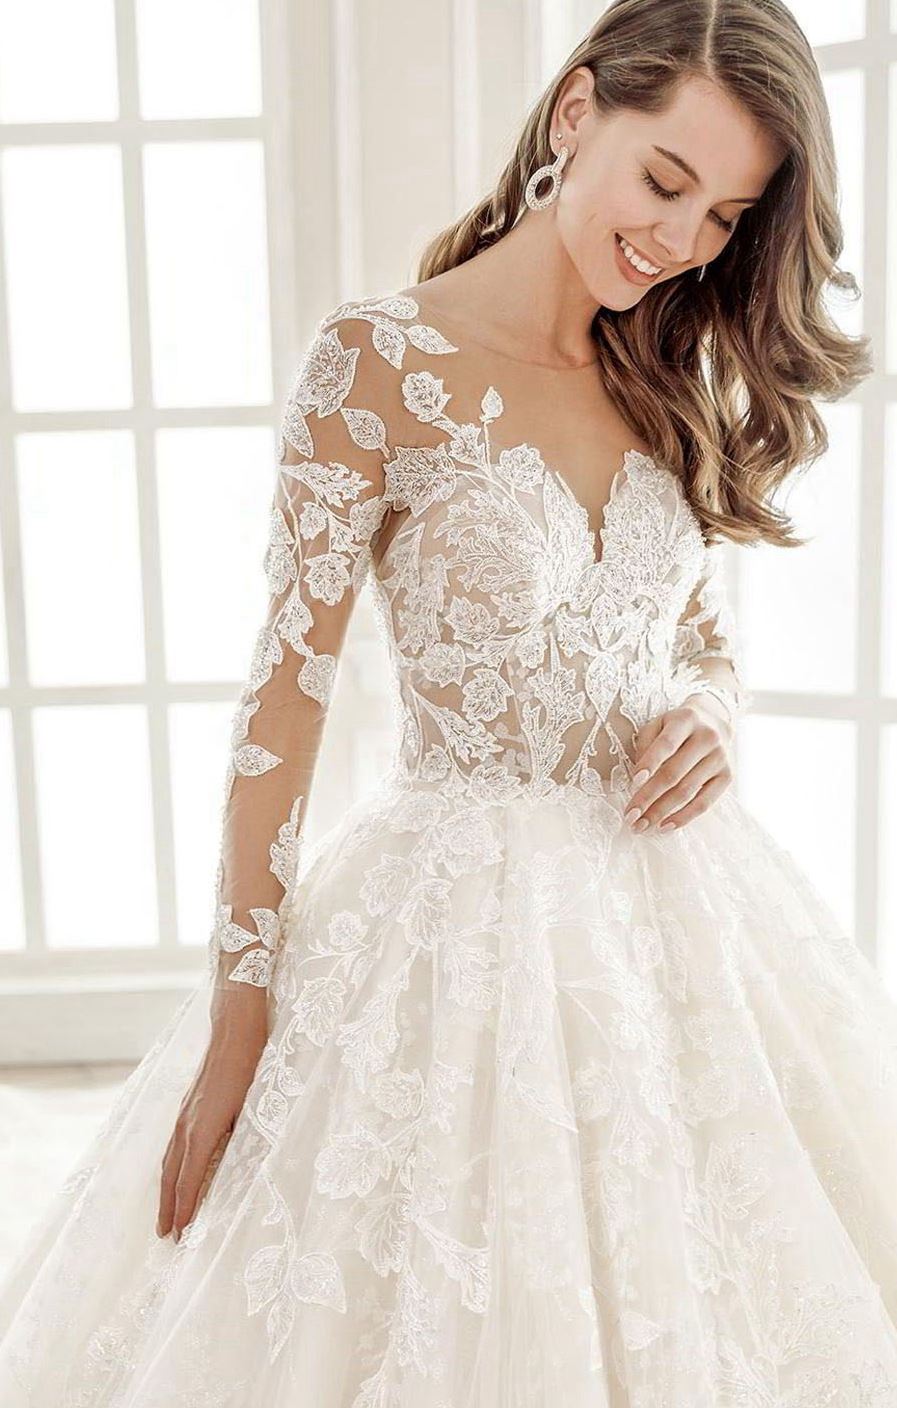 New lace long sleeves illusion neckline gorgeous style bridal gown